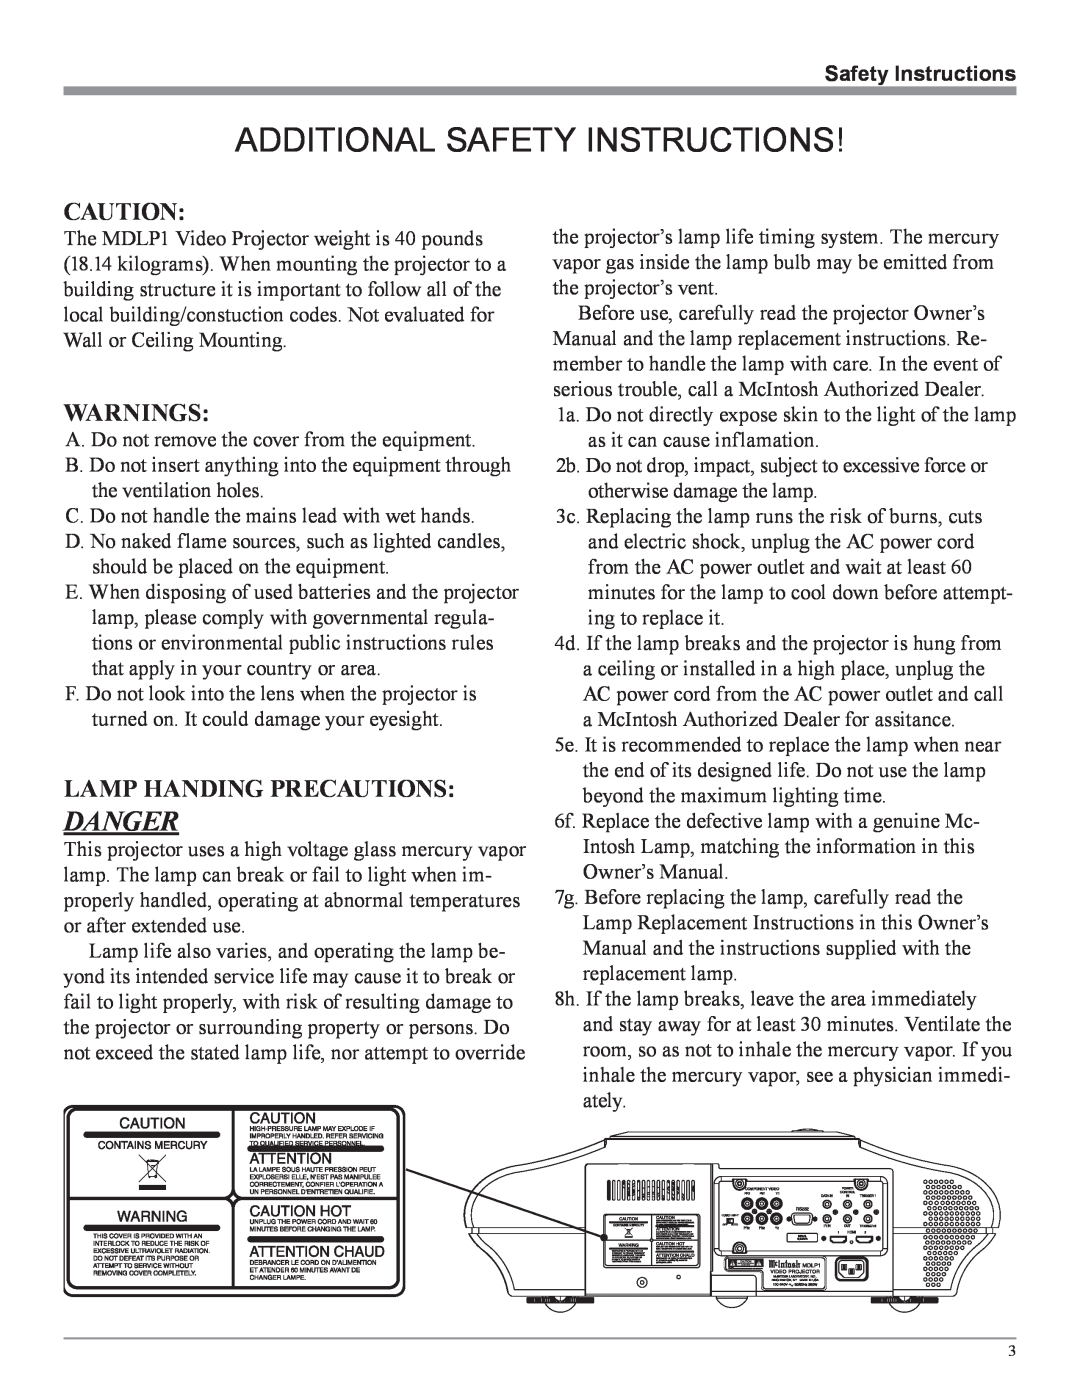 McIntosh MDLP1 owner manual Additional Safety Instructions, Danger, Warnings, Lamp Handing Precautions 